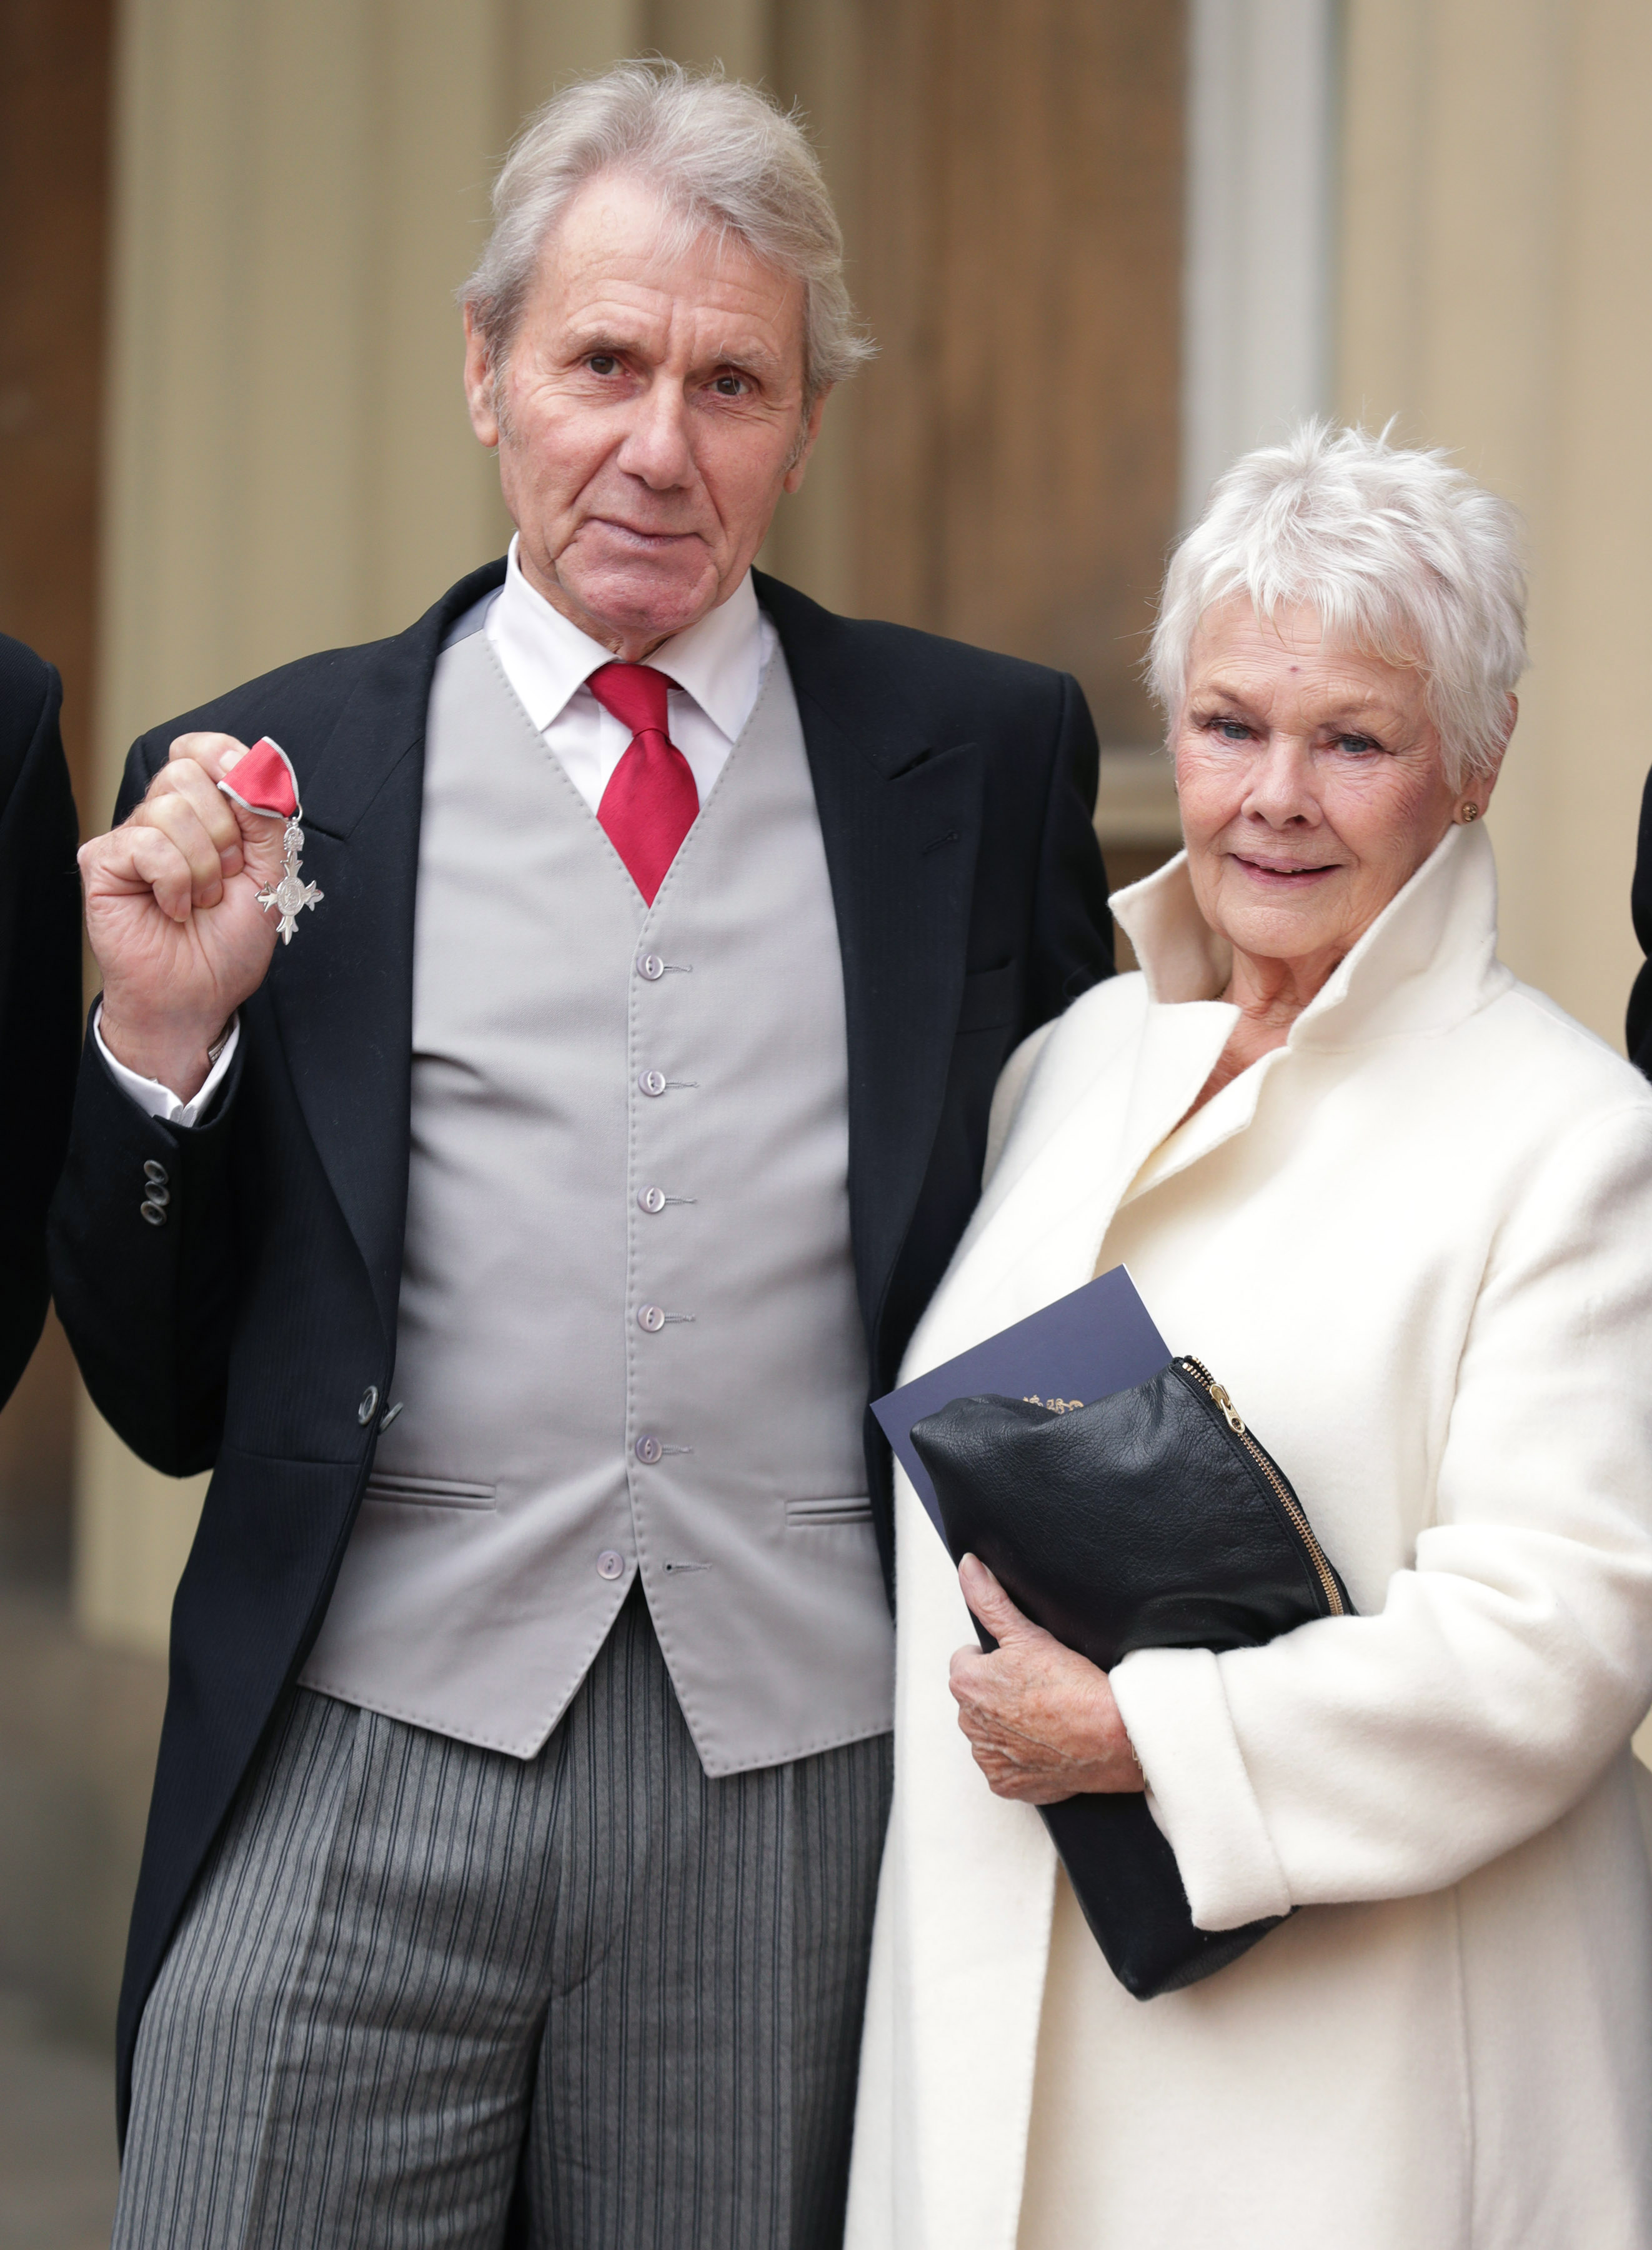 Dame Judi Dench and David Mills with his MBE which he received from the Prince of Wales during an Investiture ceremony at Buckingham Palace on November 18, 2016 in London, England. | Source: Getty Images